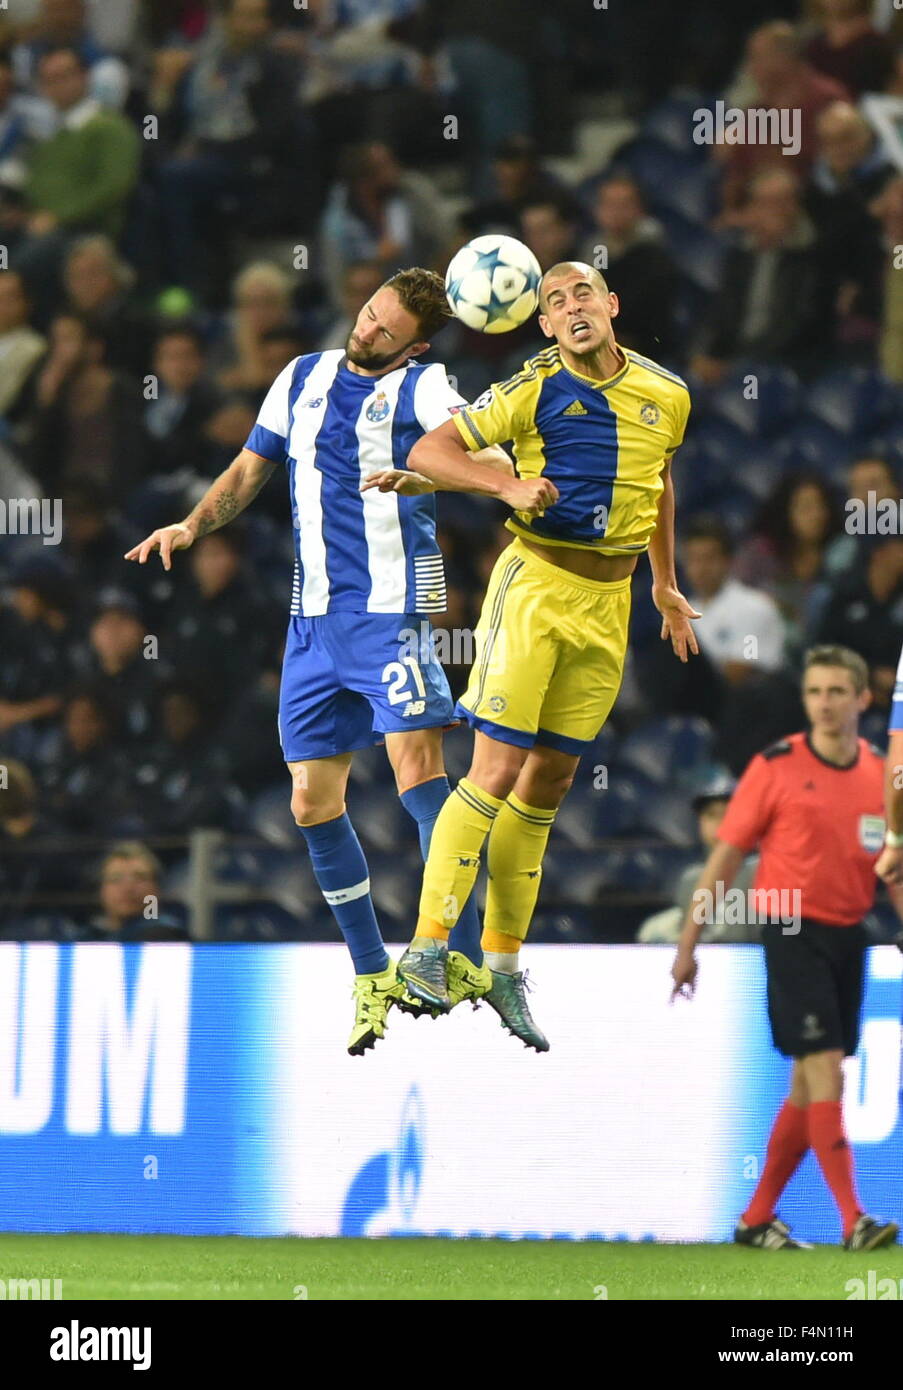 Porto, Portugal. 20th Oct, 2015. Miguel Layun (L) of Porto vies with a player of Maccabi Tel-Avivin Porto during the UEFA Champions League group G football match, in Porto, Portugal, Oct. 20, 2015. Porto won 2-0. Credit:  Zhang Liyun/Xinhua/Alamy Live News Stock Photo